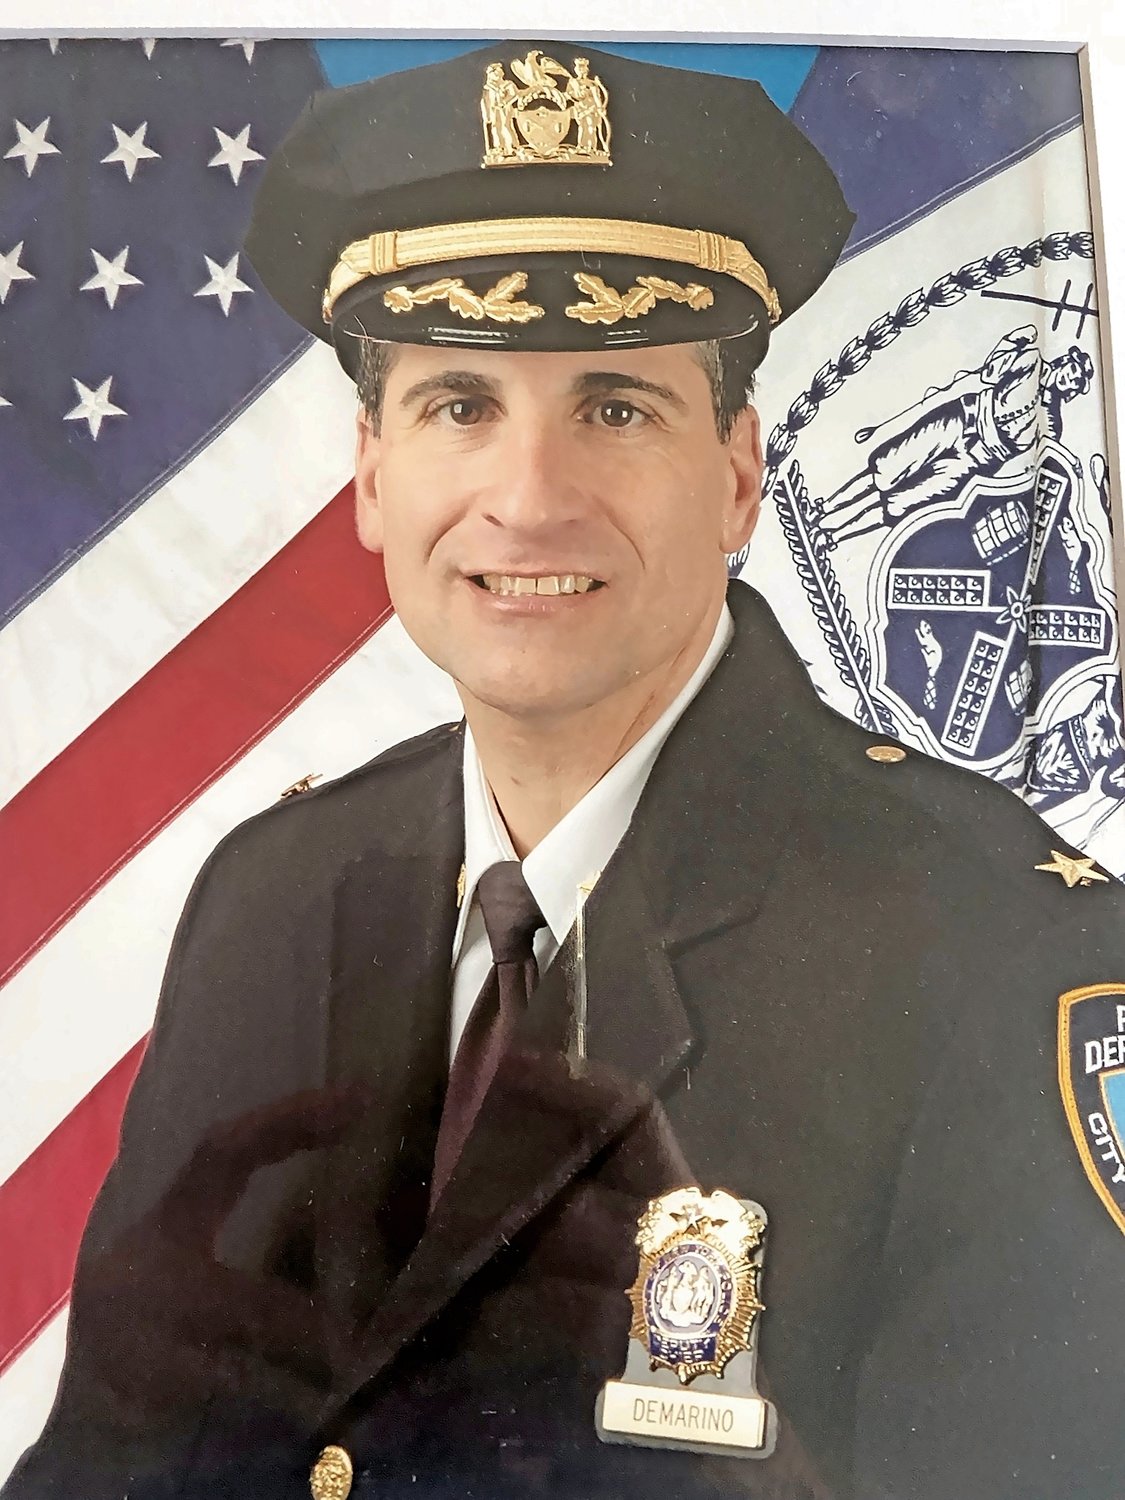 Vincent DeMarino was an NYPD first responder during the 9/11 attacks. He died in 2019 of a brain tumor that officials believe was related to his work in the toxic air at ground zero.